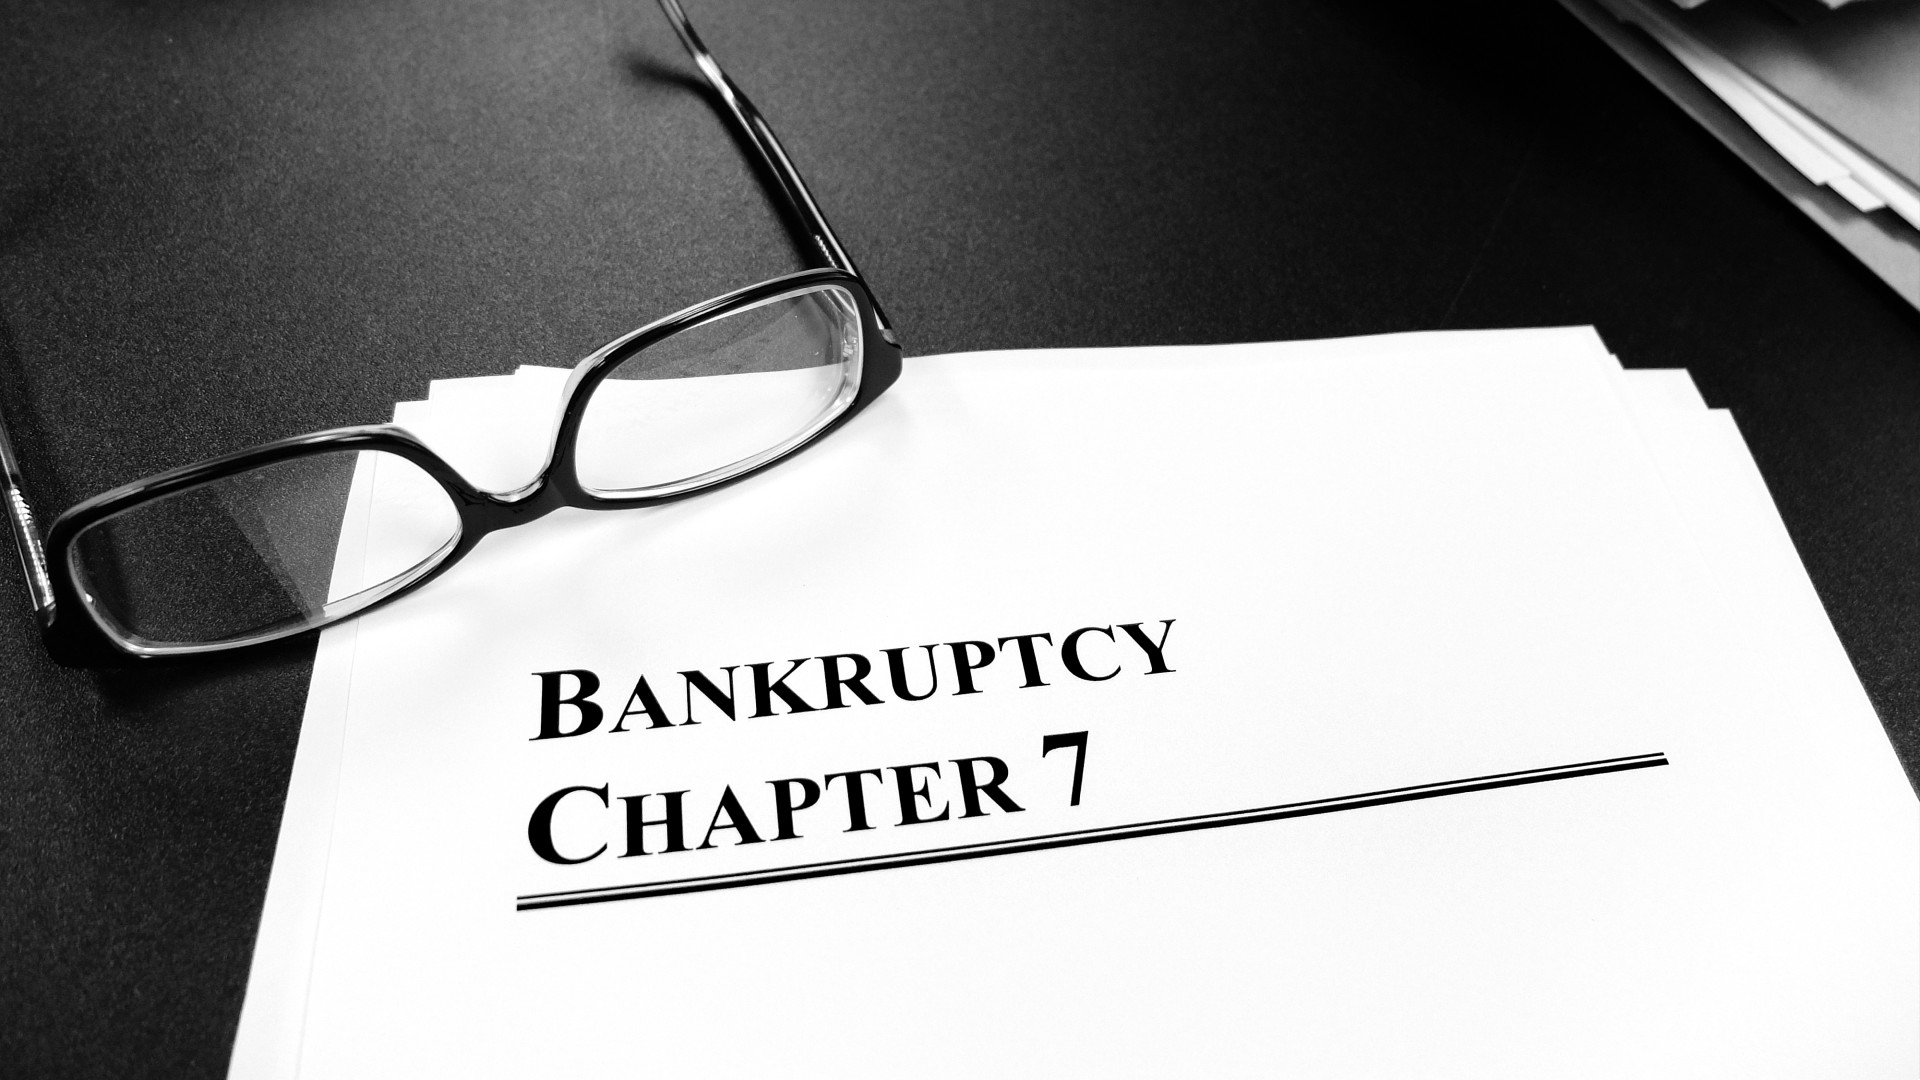 Bankruptcy Chapter 7 documents with glasses on top